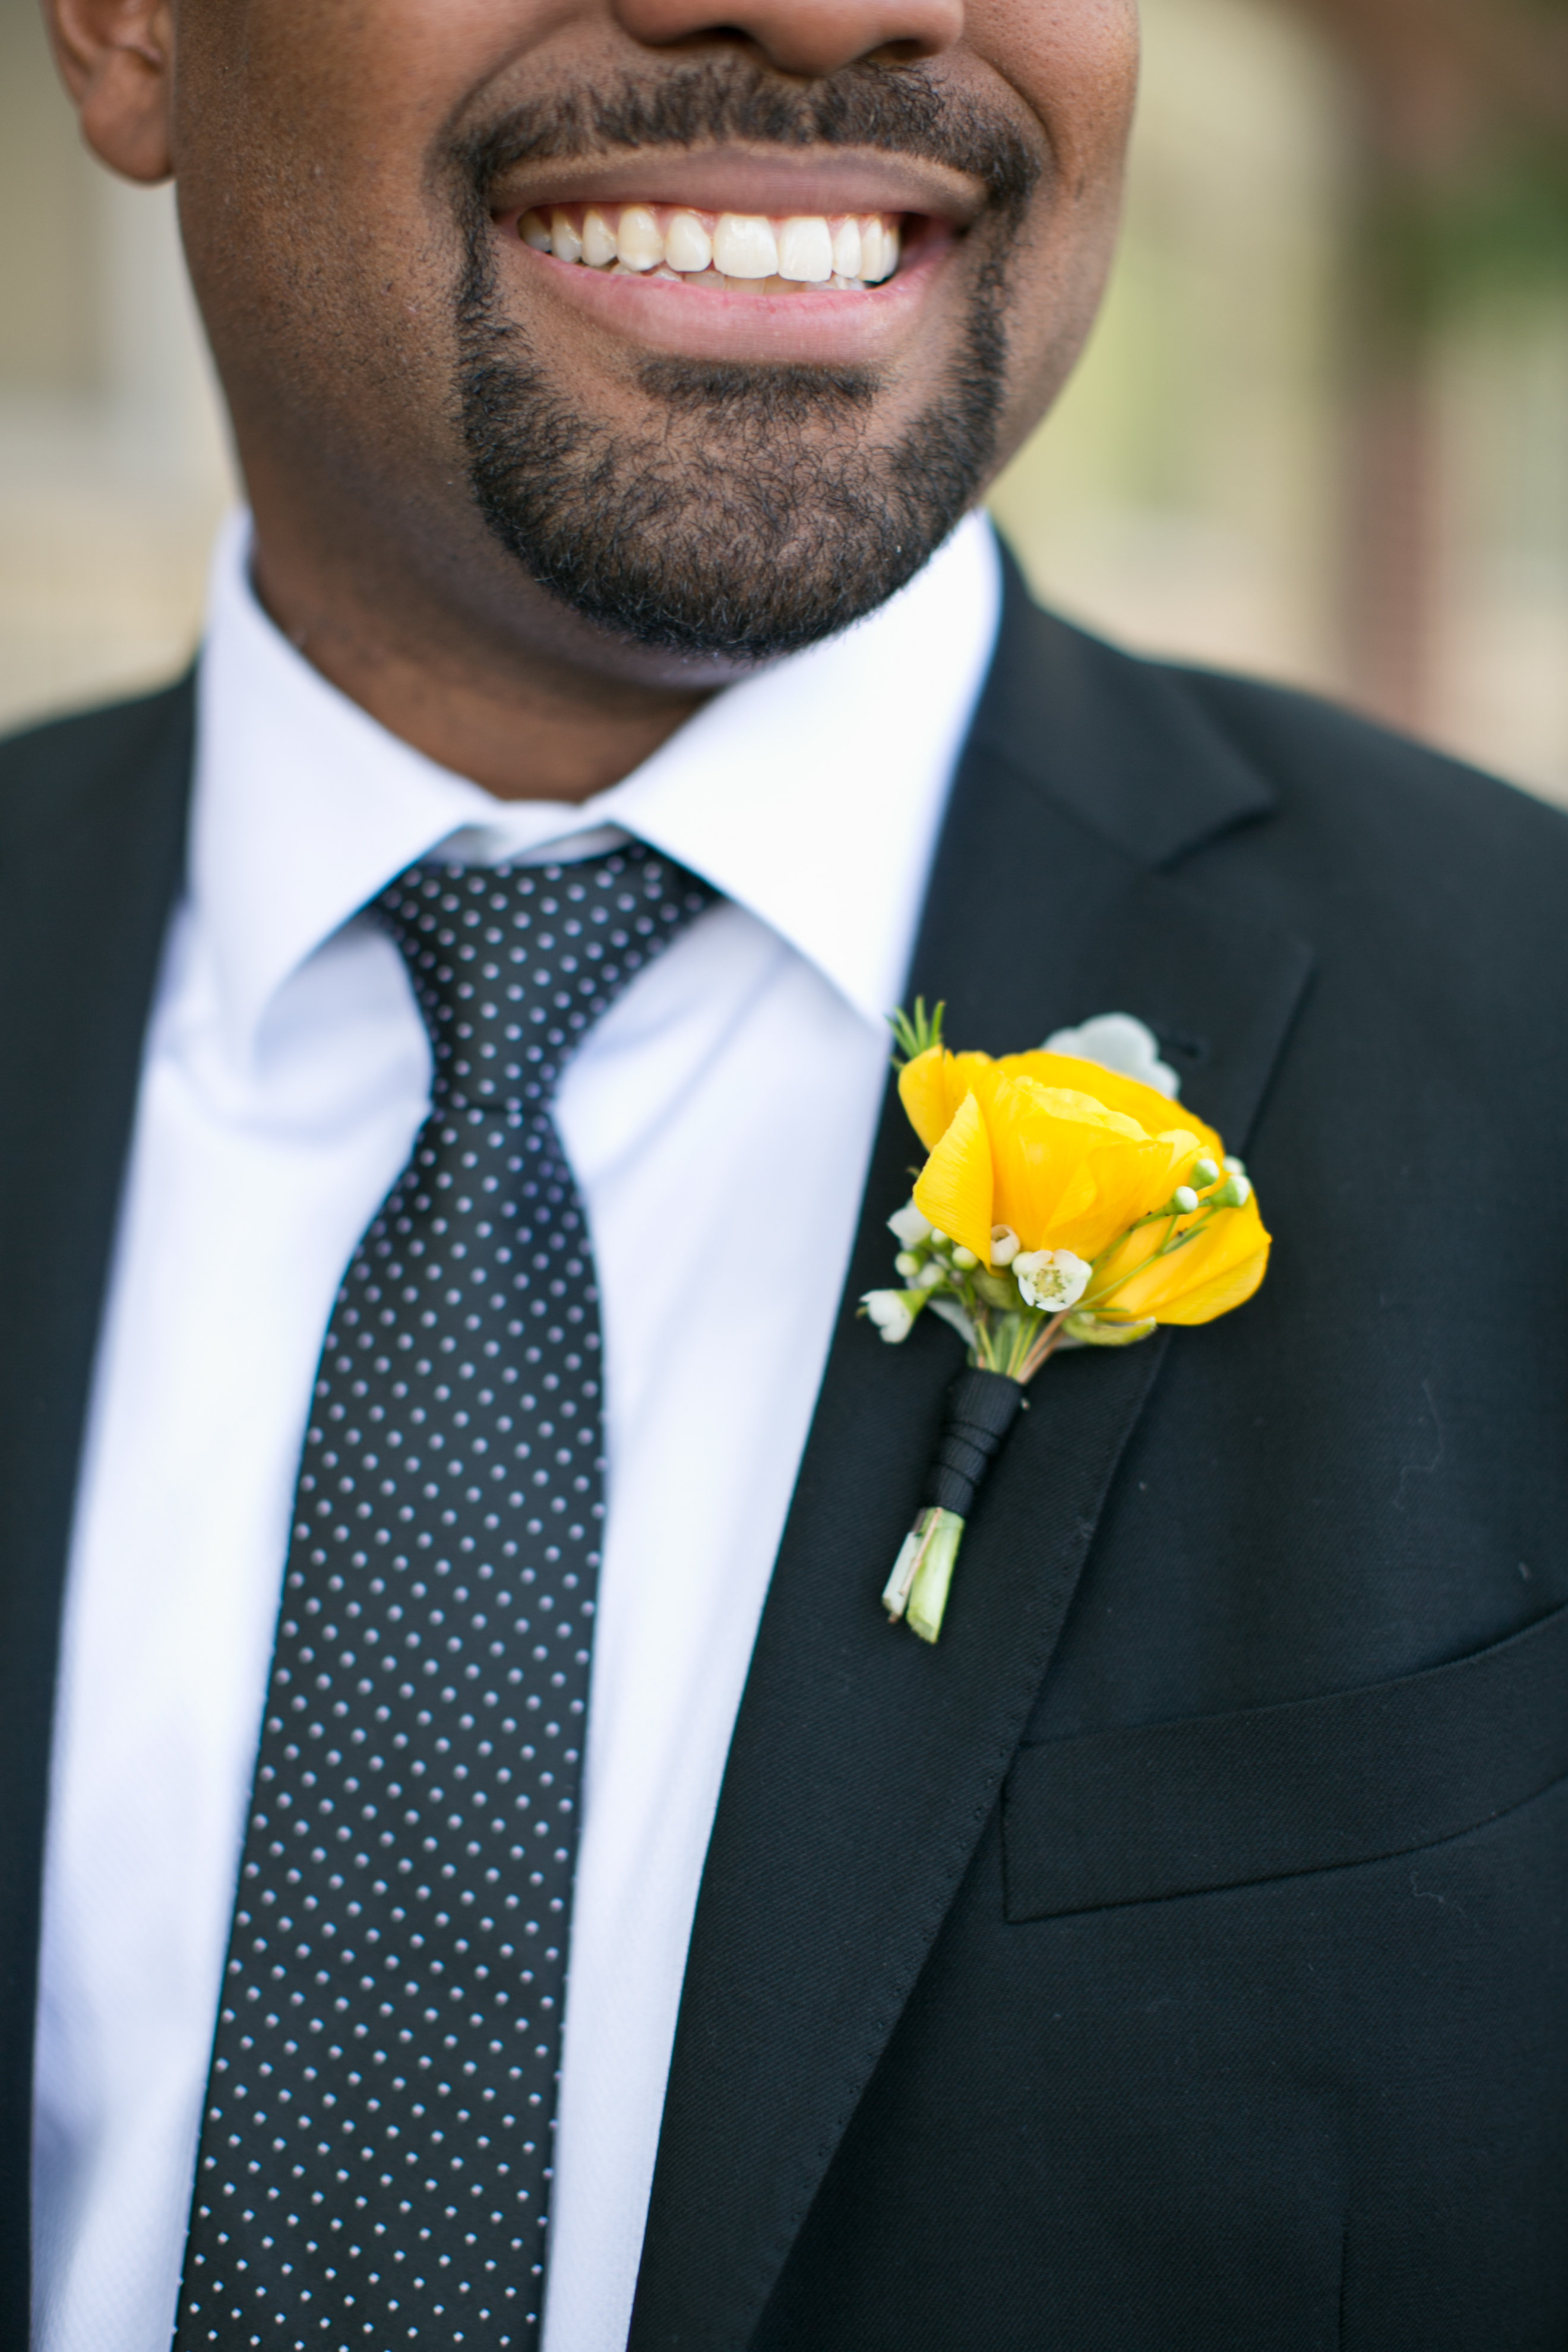 Smiling groom with bright yellow boutonniere and patterned navy tie for summer wedding.